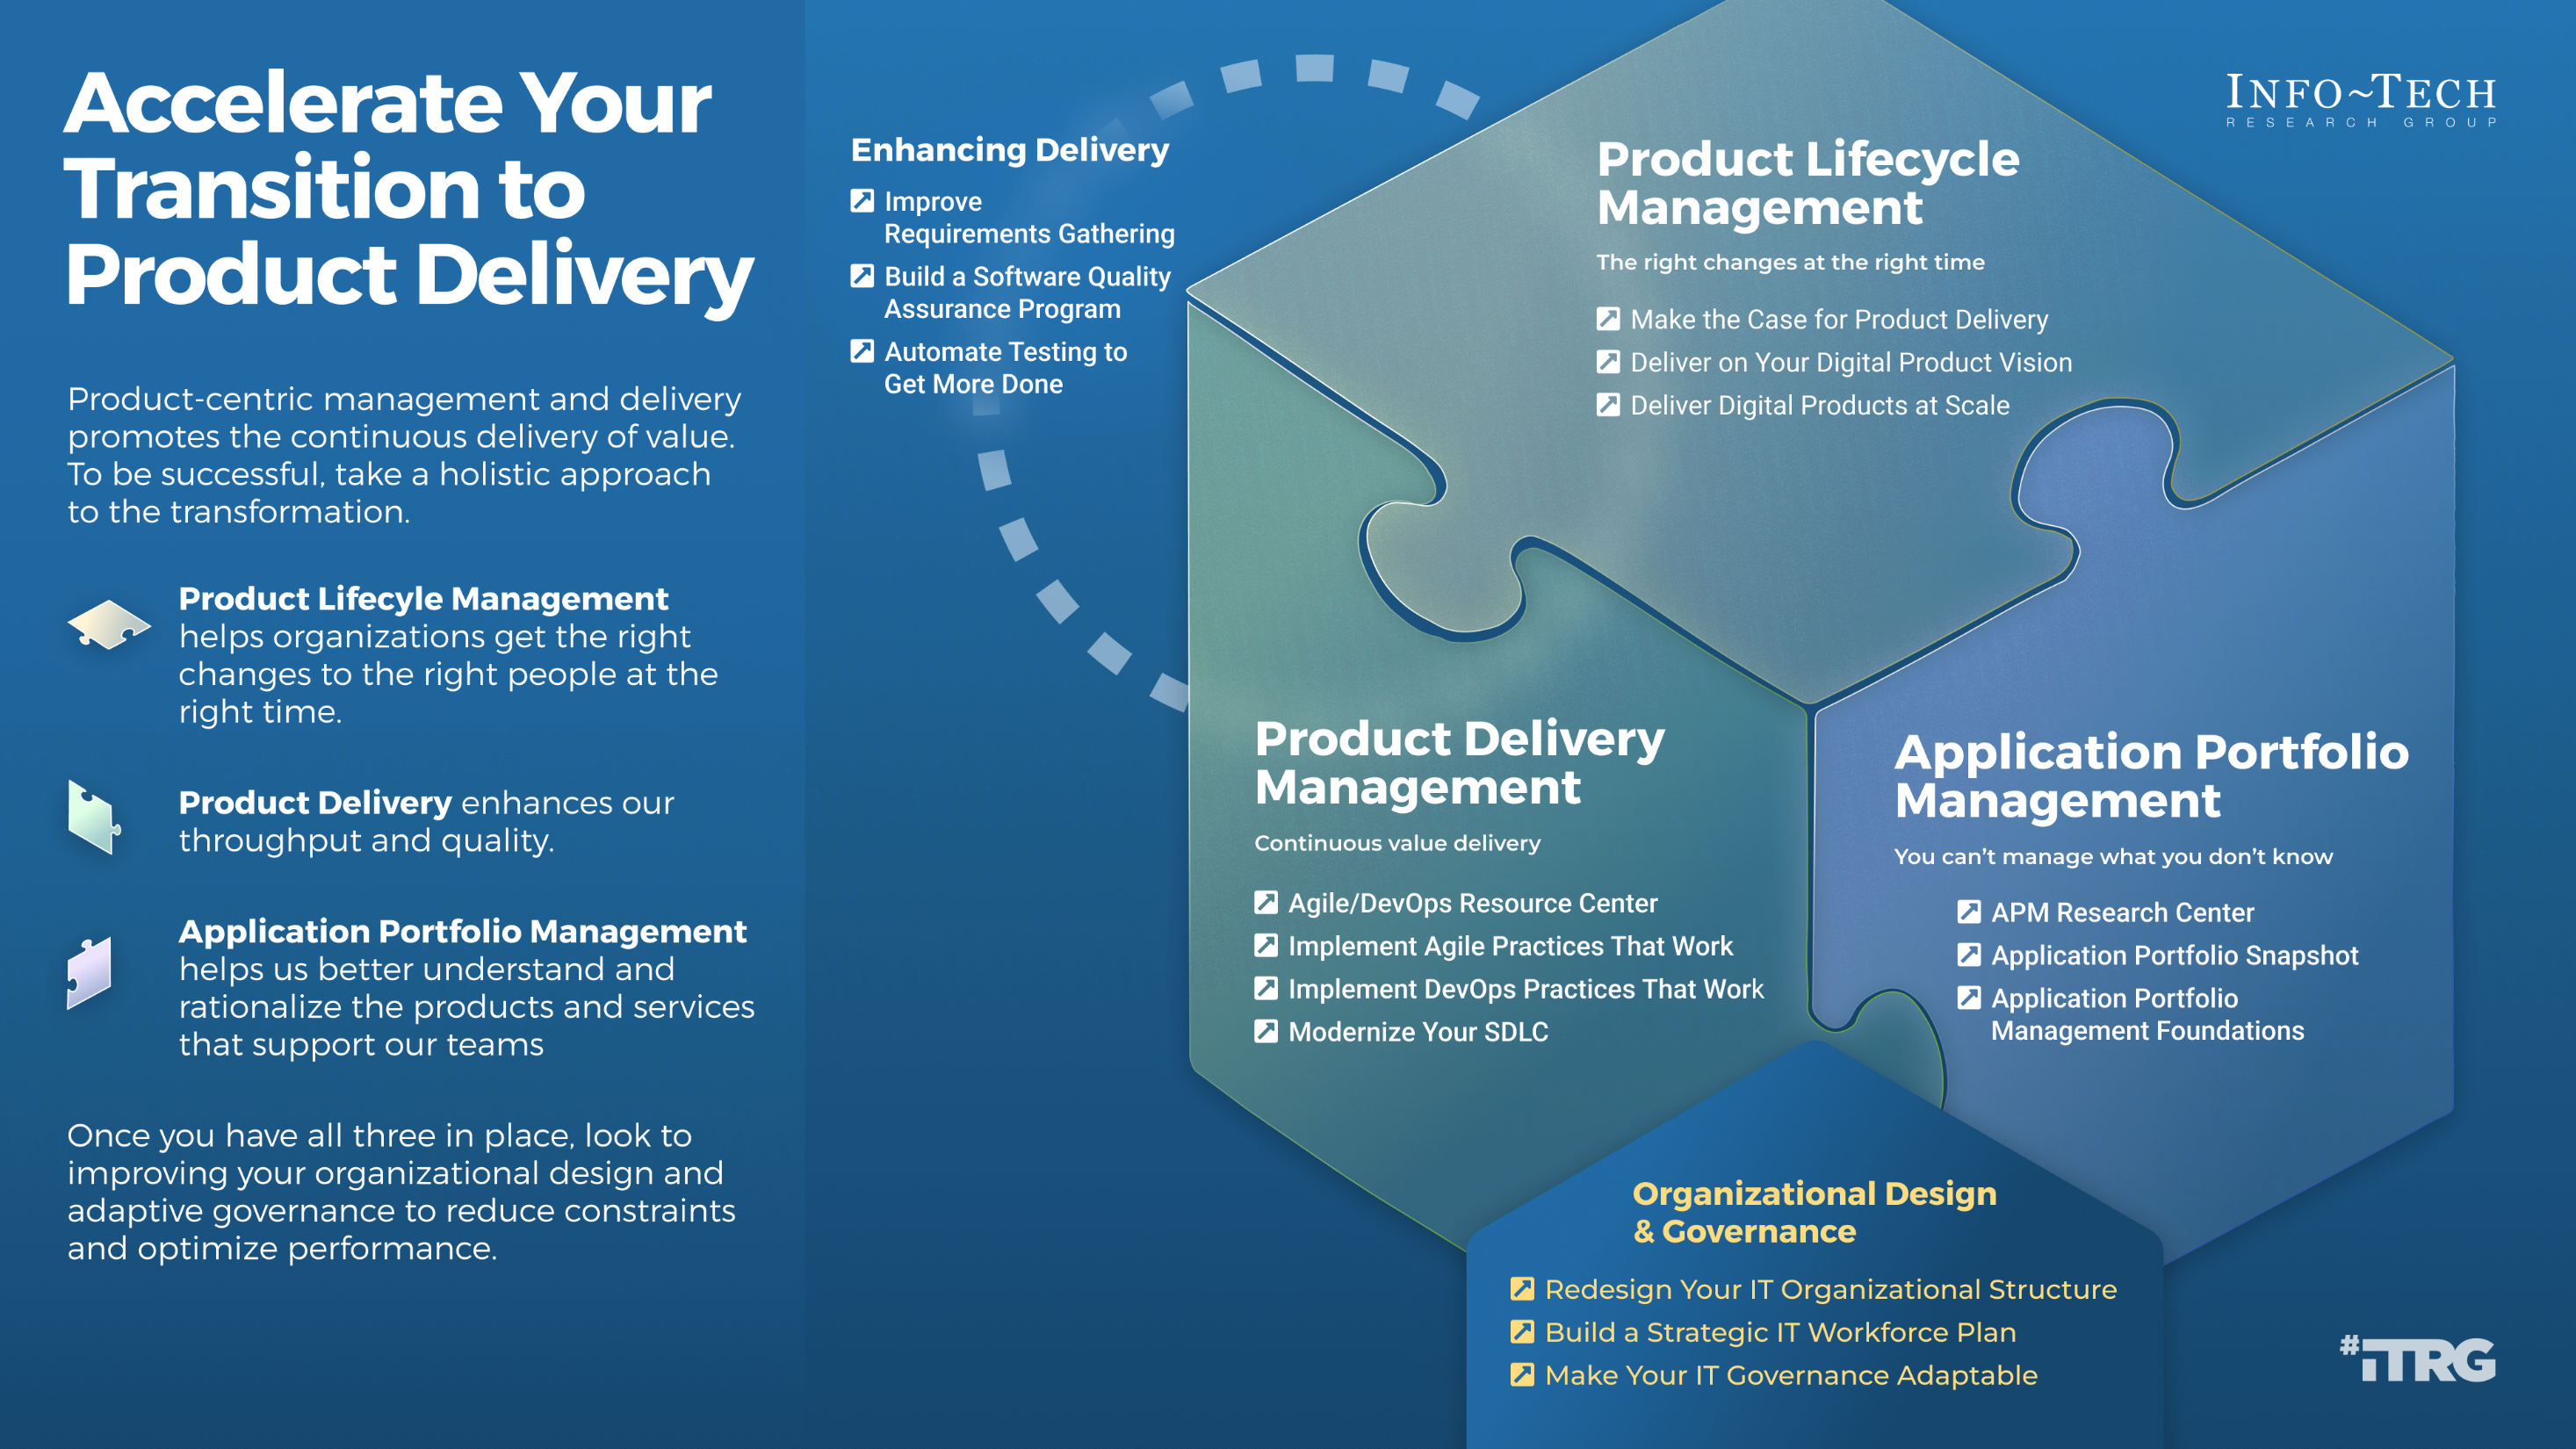 This is an image of an Info-Tech Thought Map for Accelerate Your Transition to Product Delivery